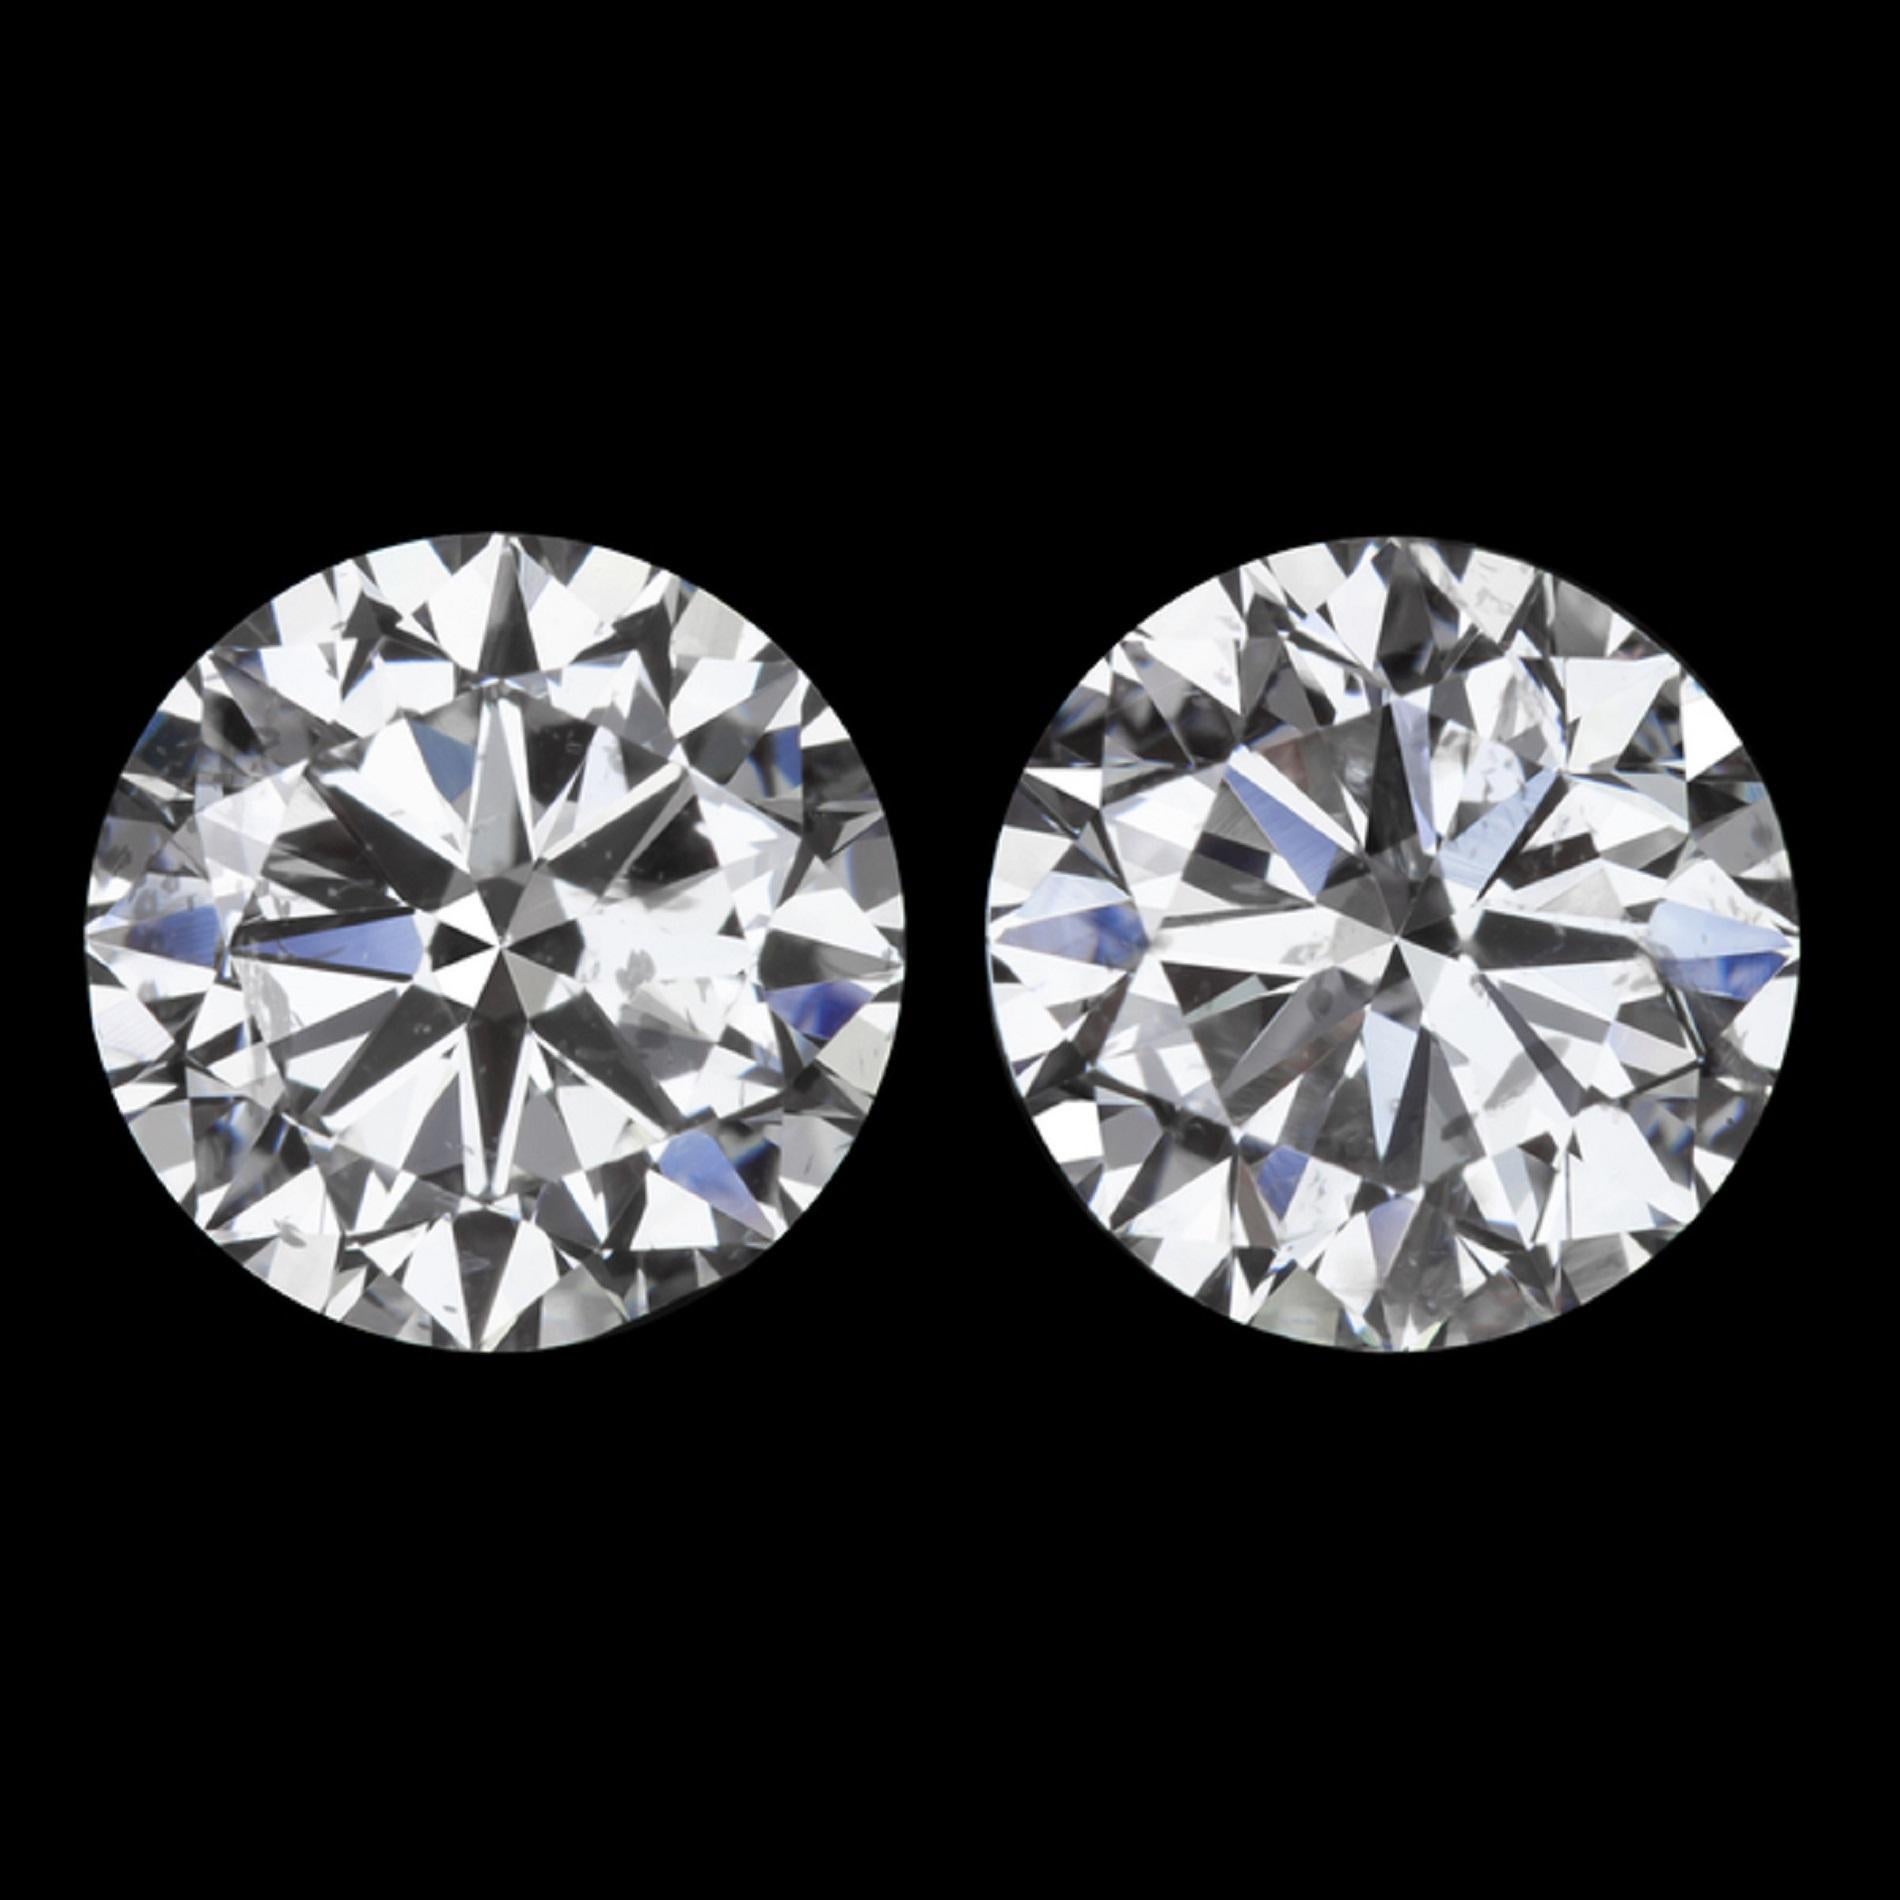 Certified Natural 2 Carat D Color Round Brilliant Cut Diamond Studs
100% eye clean being VS1
extremely white and crisp diamonds
Set in solid platinum